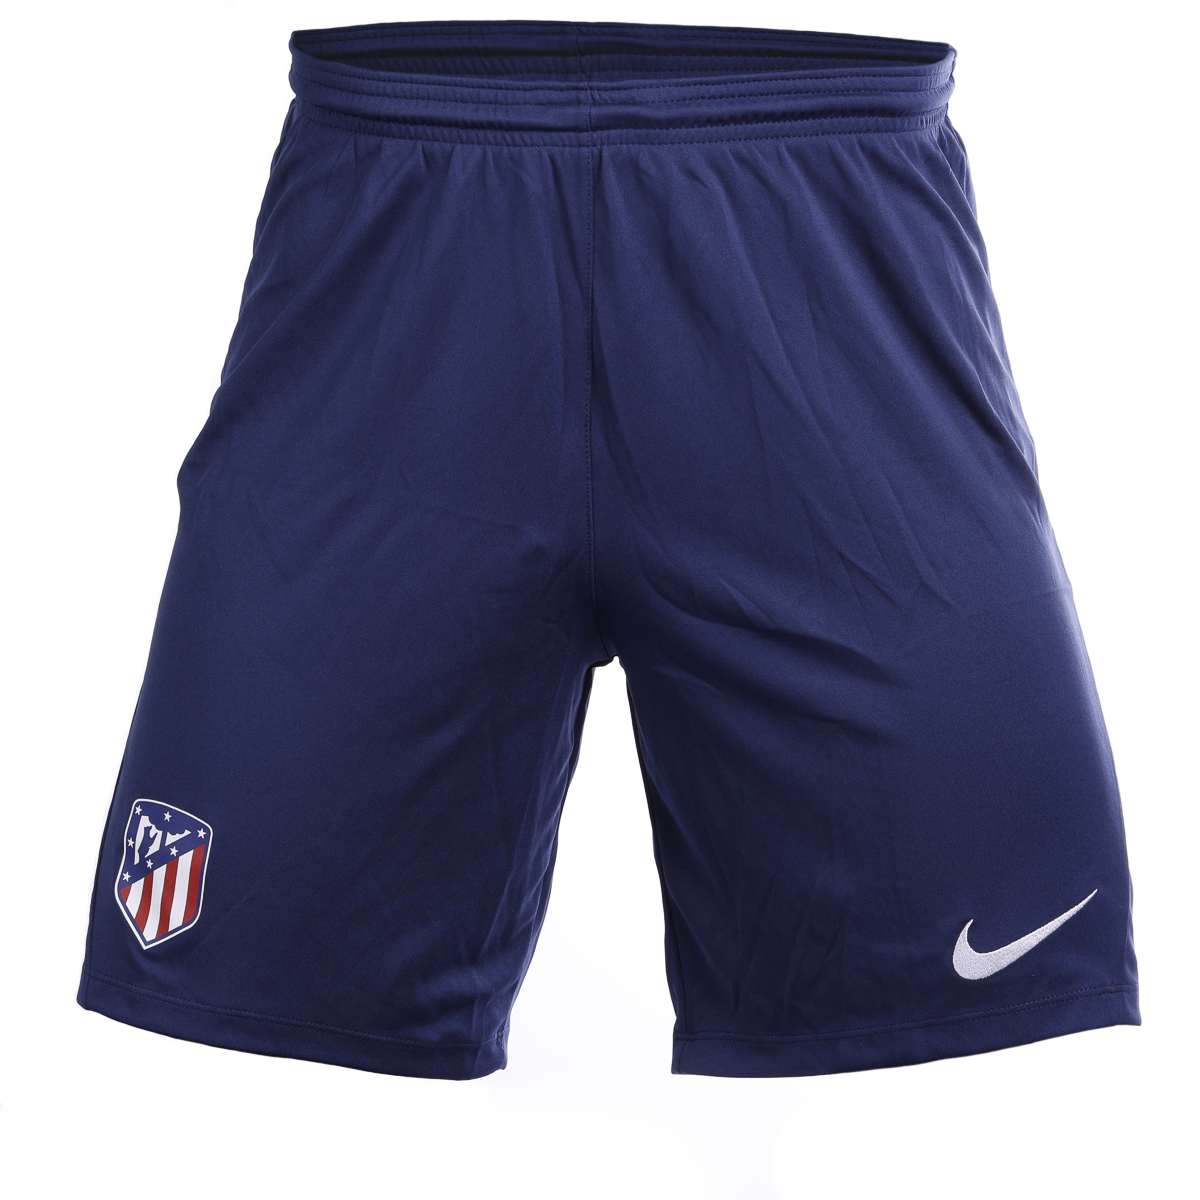 WOMEN SHORTS FOURTH 23/24 JERSEY image number null